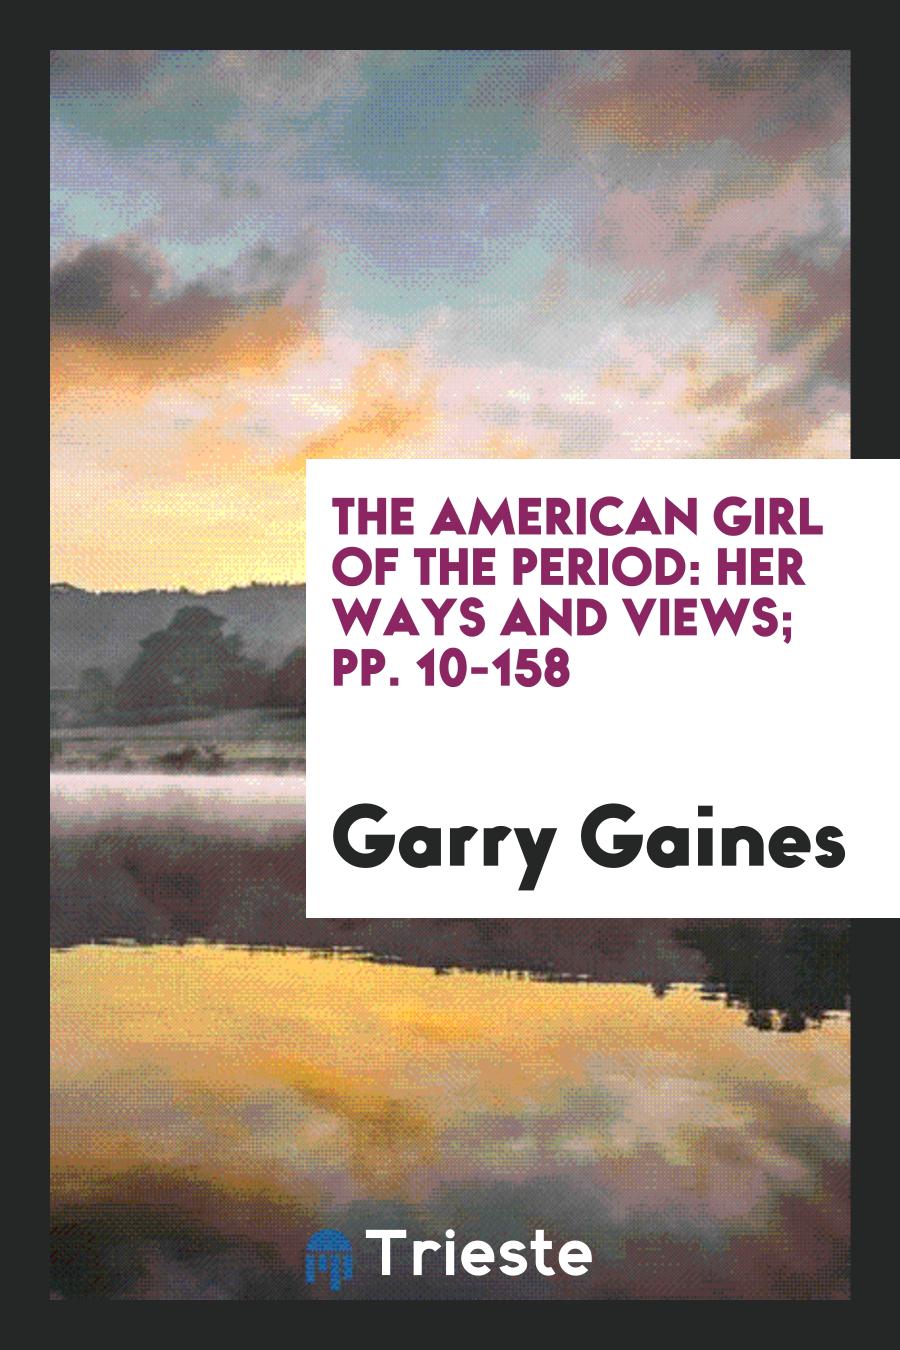 The American Girl of the Period: Her Ways and Views; pp. 10-158